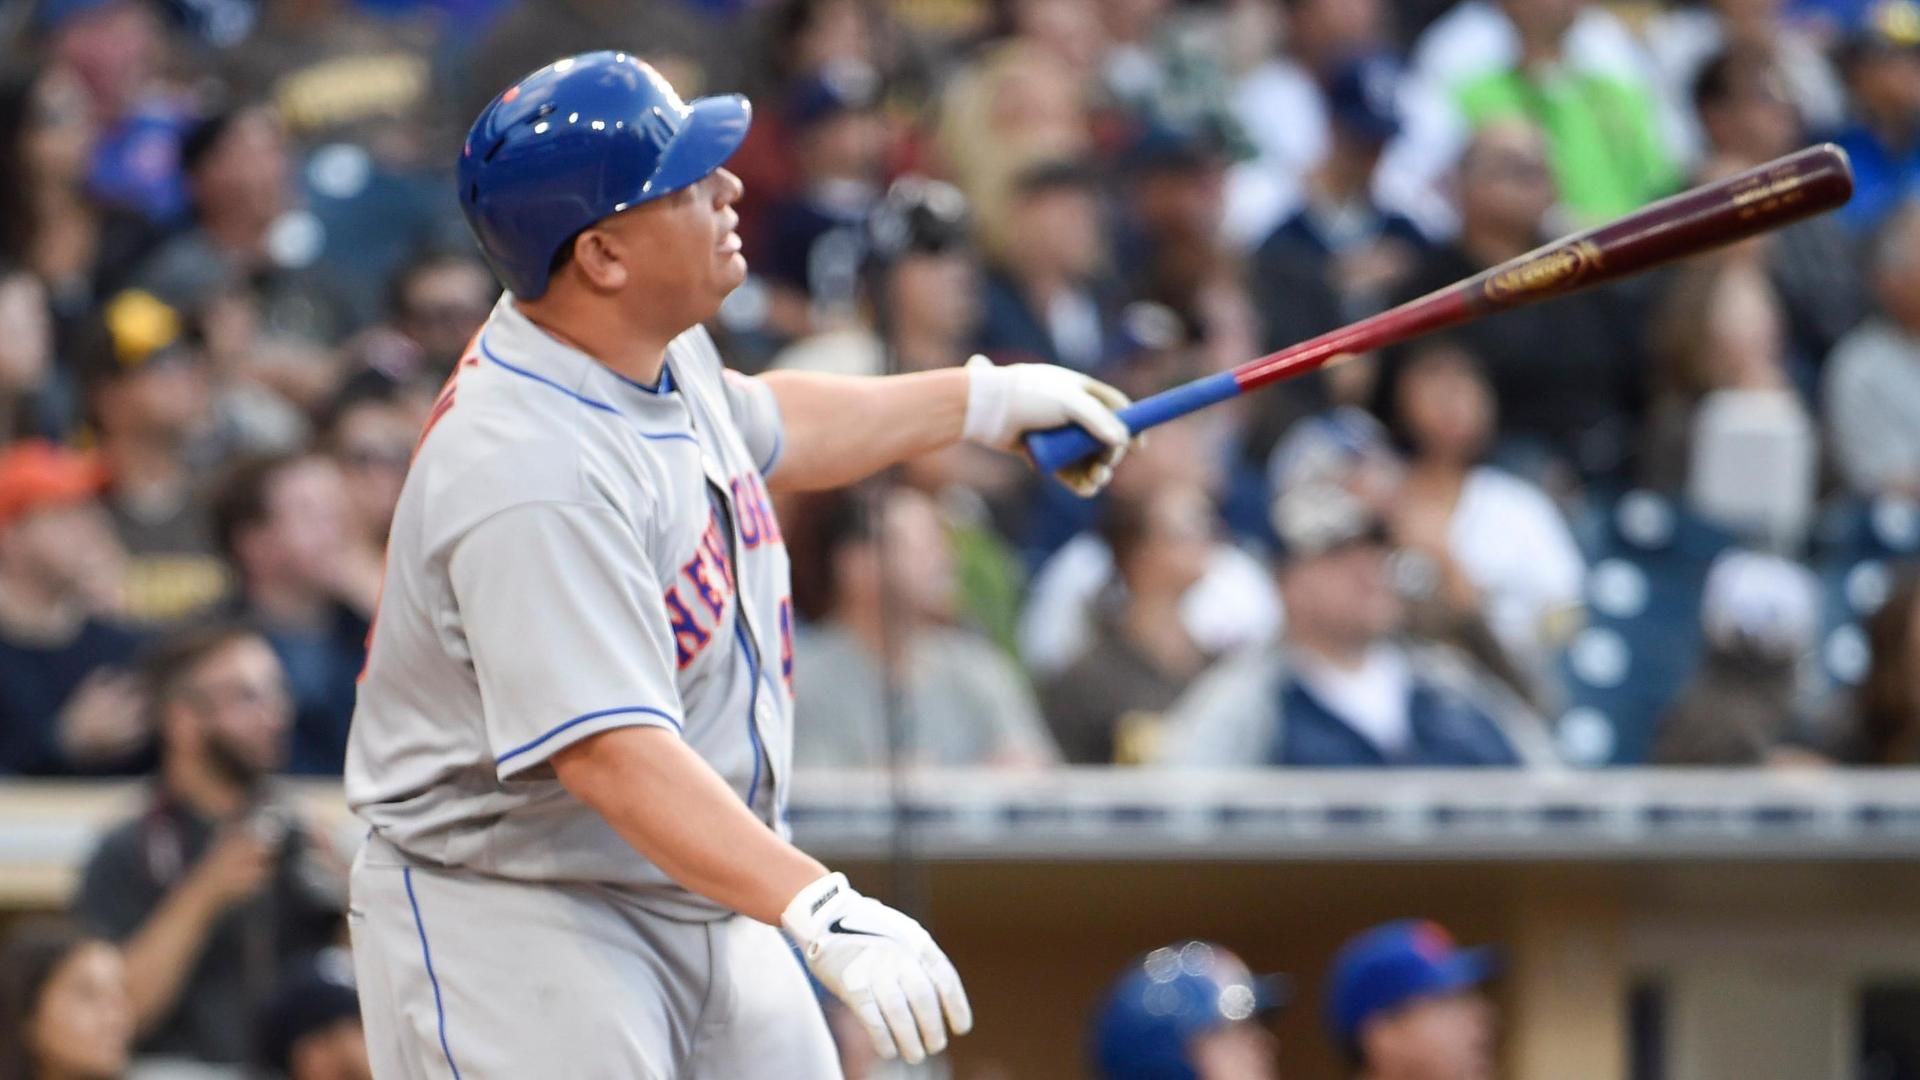 Mets pitcher Bartolo Colon hits first career homer - ABC7 Chicago